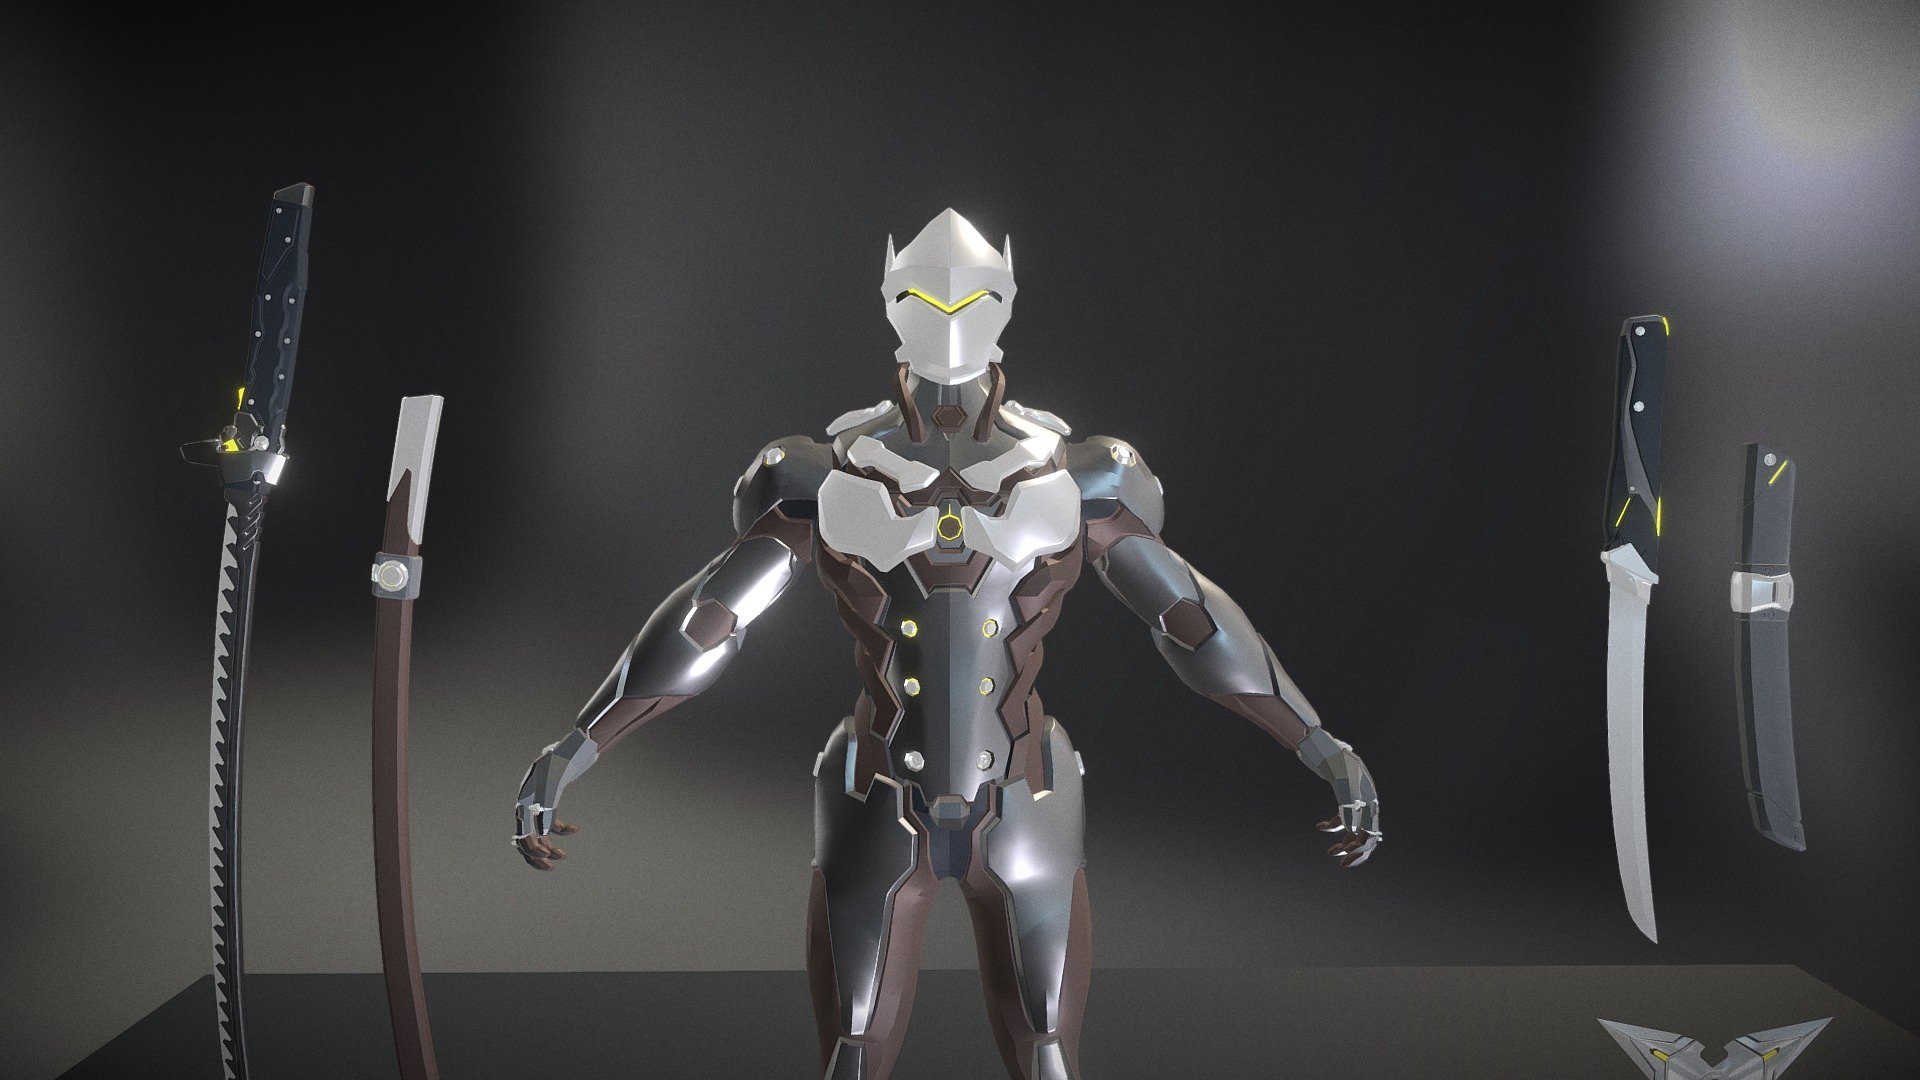 Being inspired by Overwatch game, I made a model of Genji, one of my favorite Overwatch characters. There’re still some flaws here and there, it will be very appreciated if you help me perfecting it. Thank you so much!
Please notice that this model haven't have Uv Mapping yet!! - 3D Character Model: Genji - Overwatch 3d model